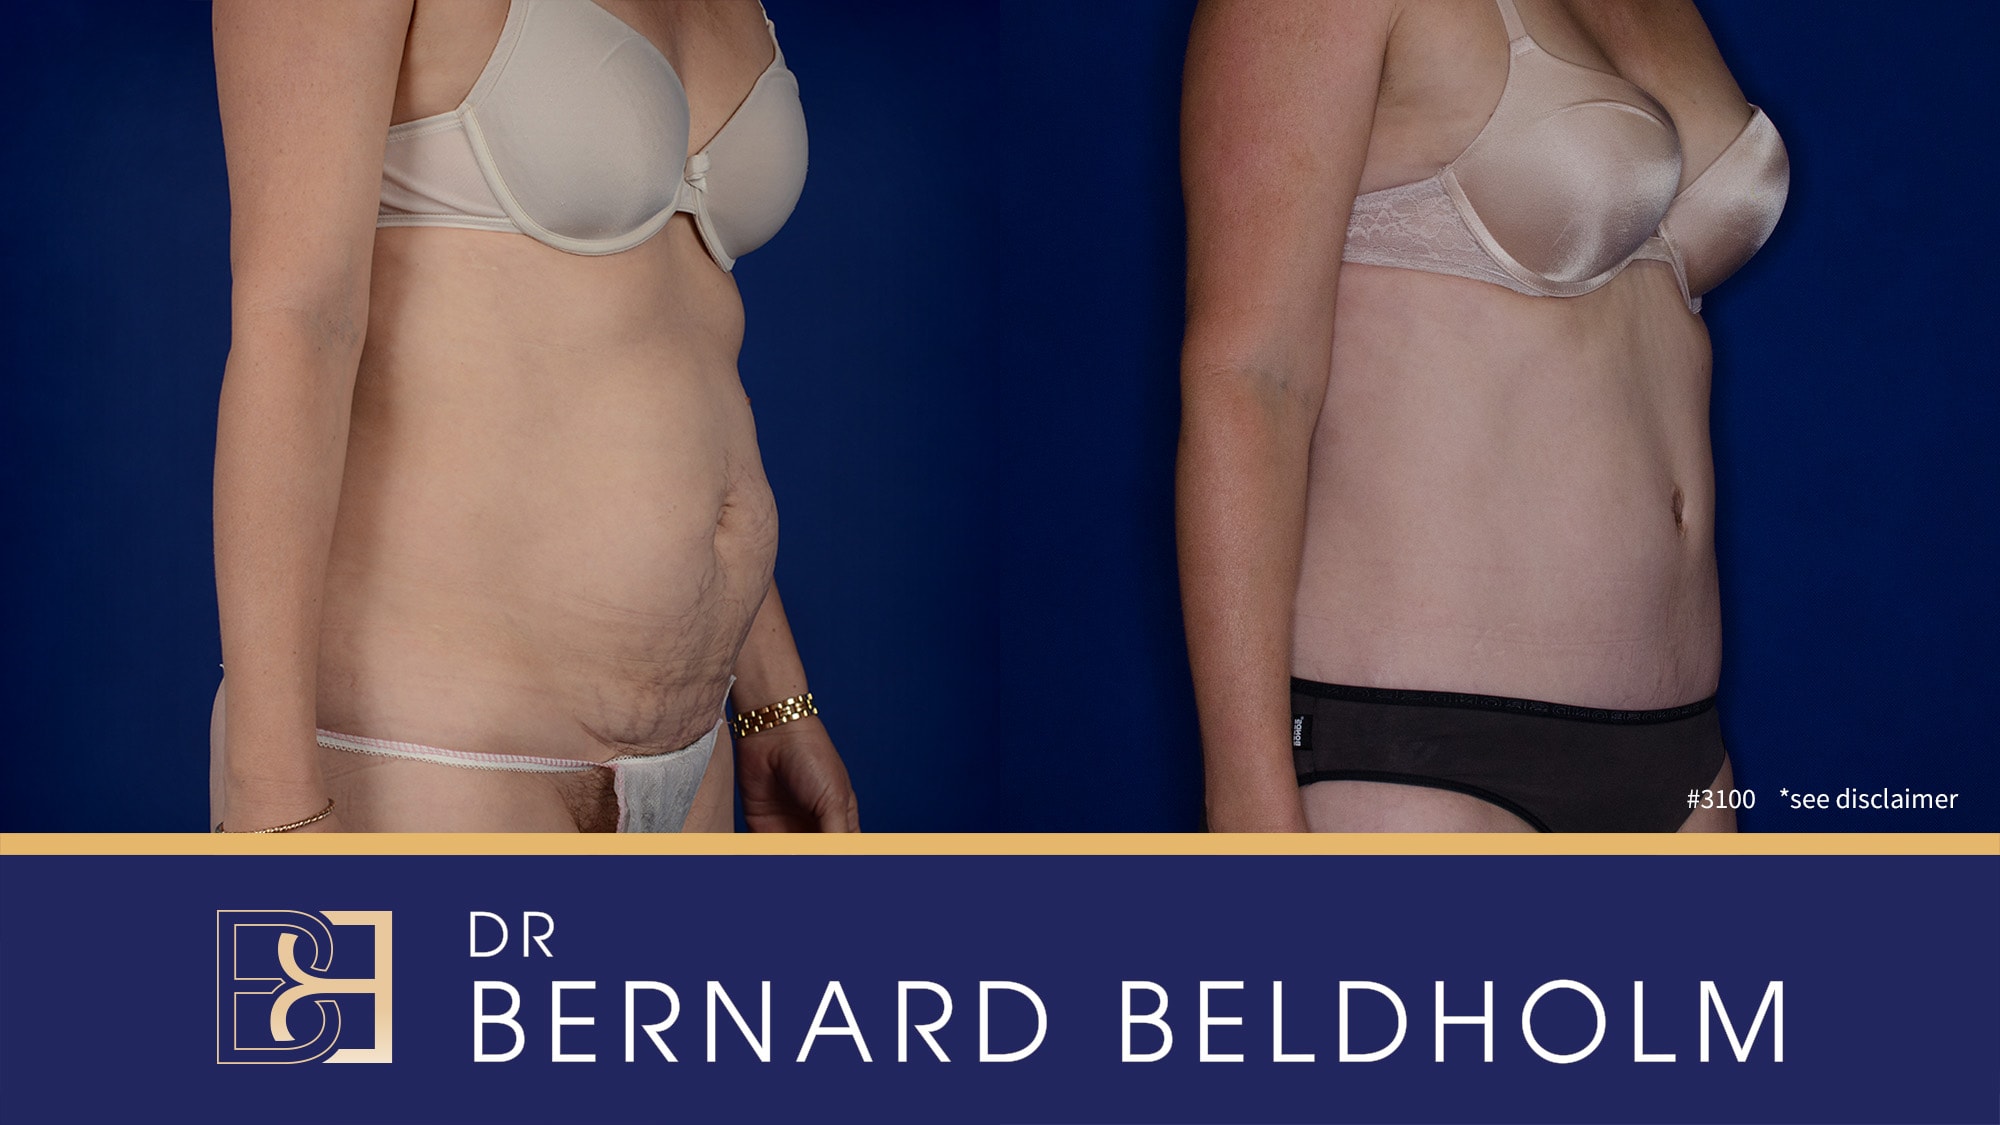 Before and after for full abdominoplasty performed by Dr Bernard Beldholm